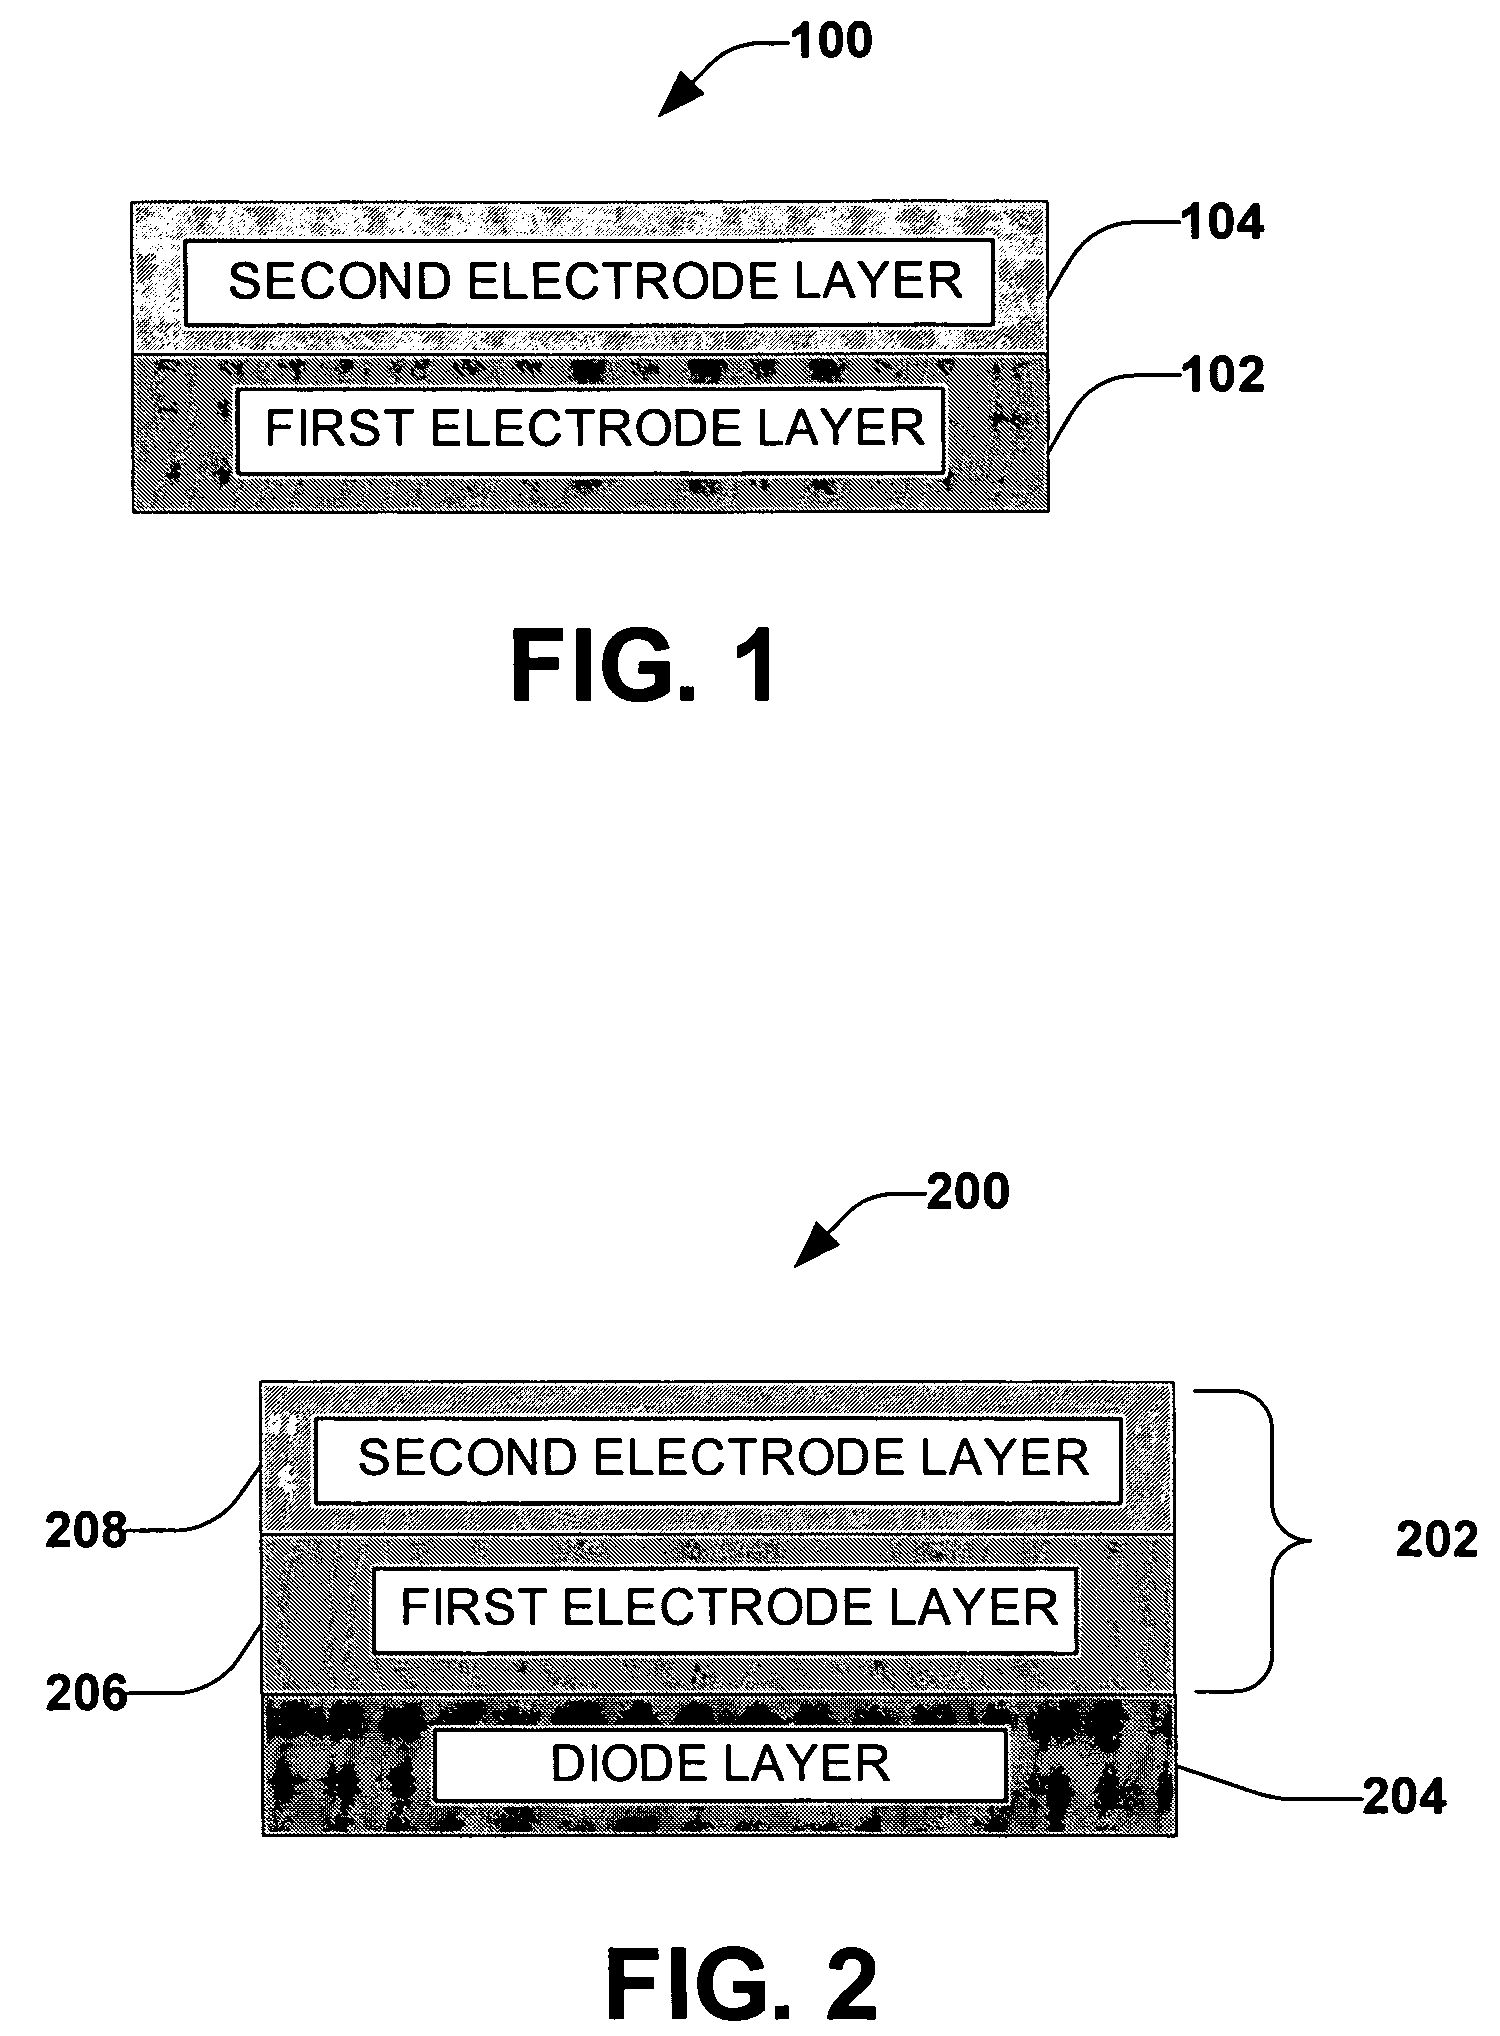 Semiconductor memory device comprising one or more injecting bilayer electrodes